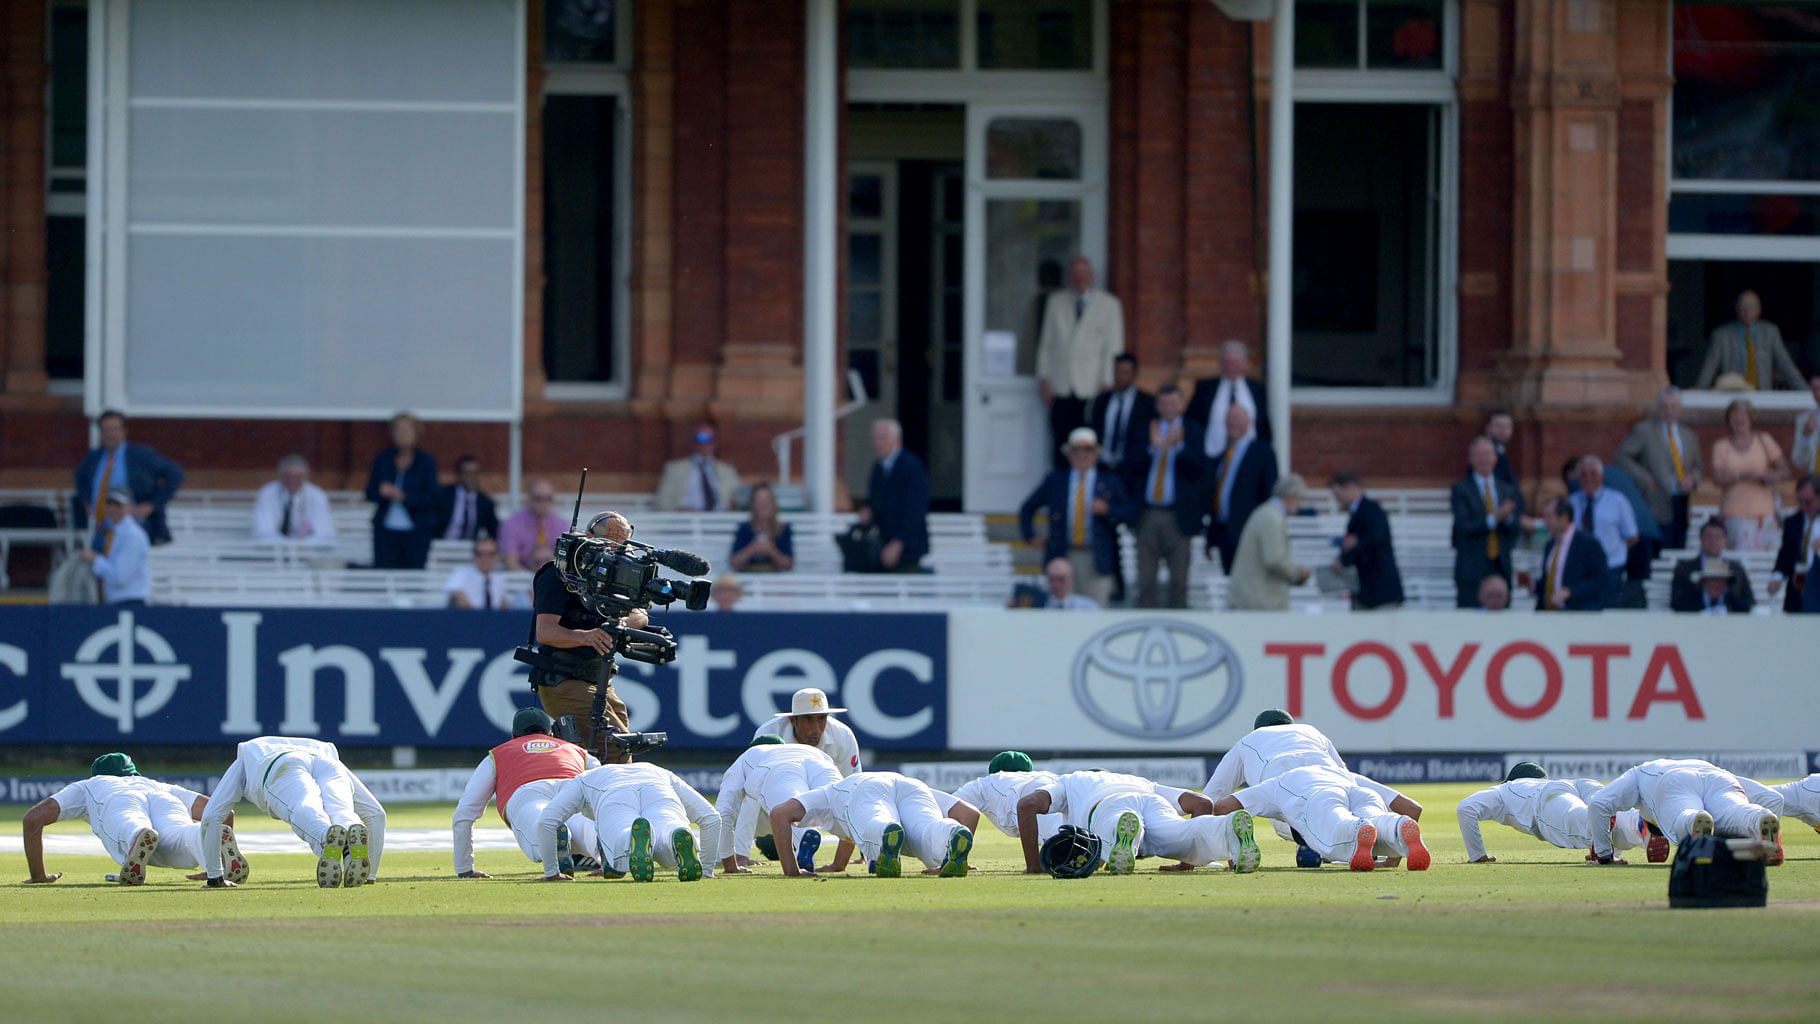 

The Pakistan team celebrate winning their match against England by doing push-ups on the pitch on day four of the cricket Test match at Lord’s. (Photo: AP)